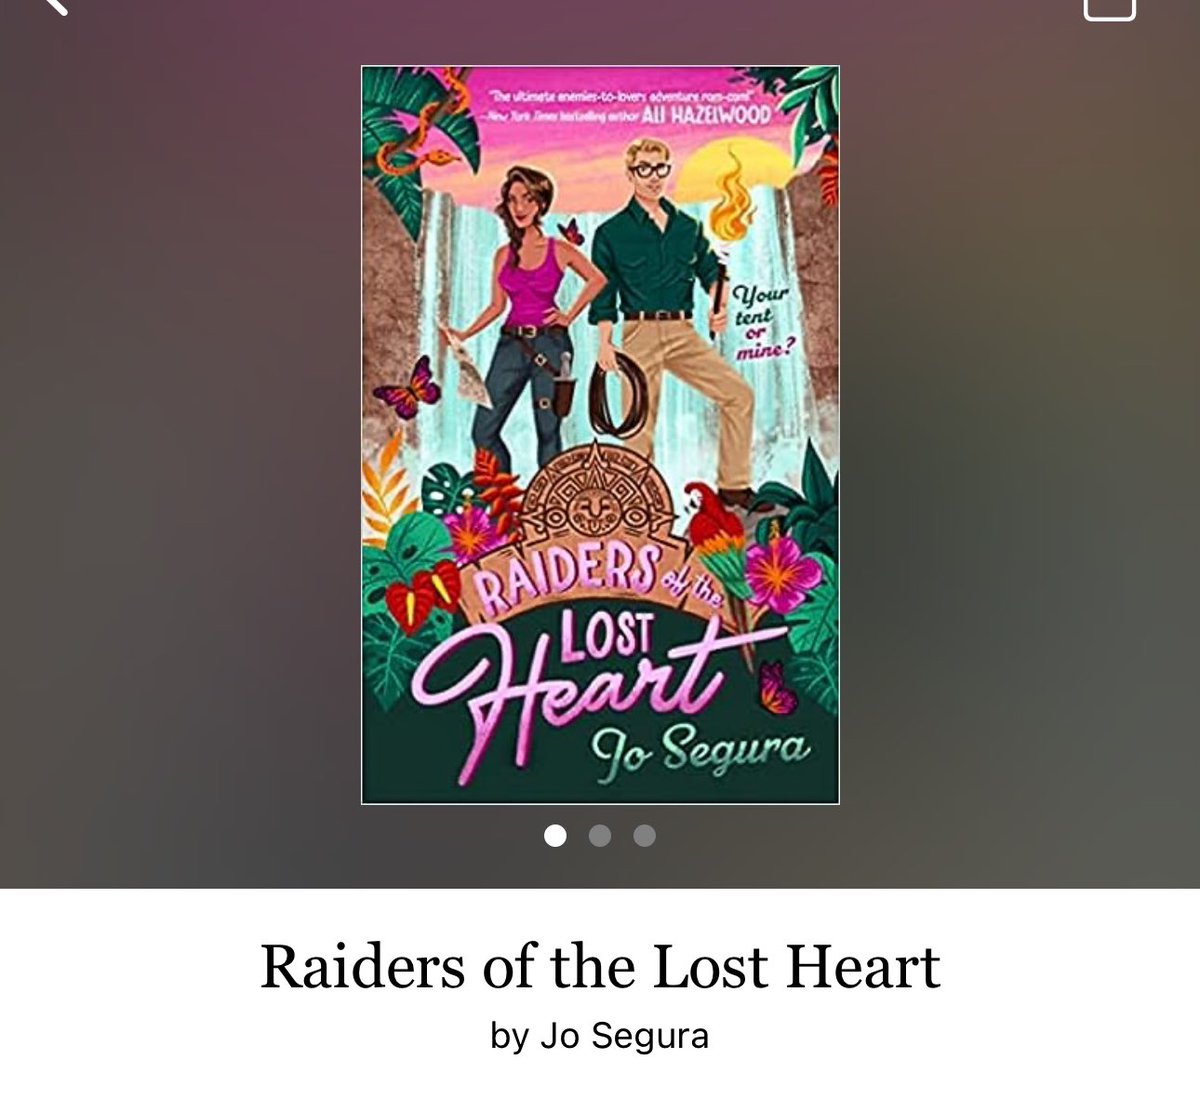 Raiders of the Lost Heart by Jo Segura 

#RaidersOfTheLostHeart by #JoSegura #6118 #24chapters #264pages #267of400 #NewRelease #Audiobook #29for8 #11houraudiobook #FordAndCorrie #Archaeologist #march2024 #clearingoffreadingshelves #whatsnext #readitquick